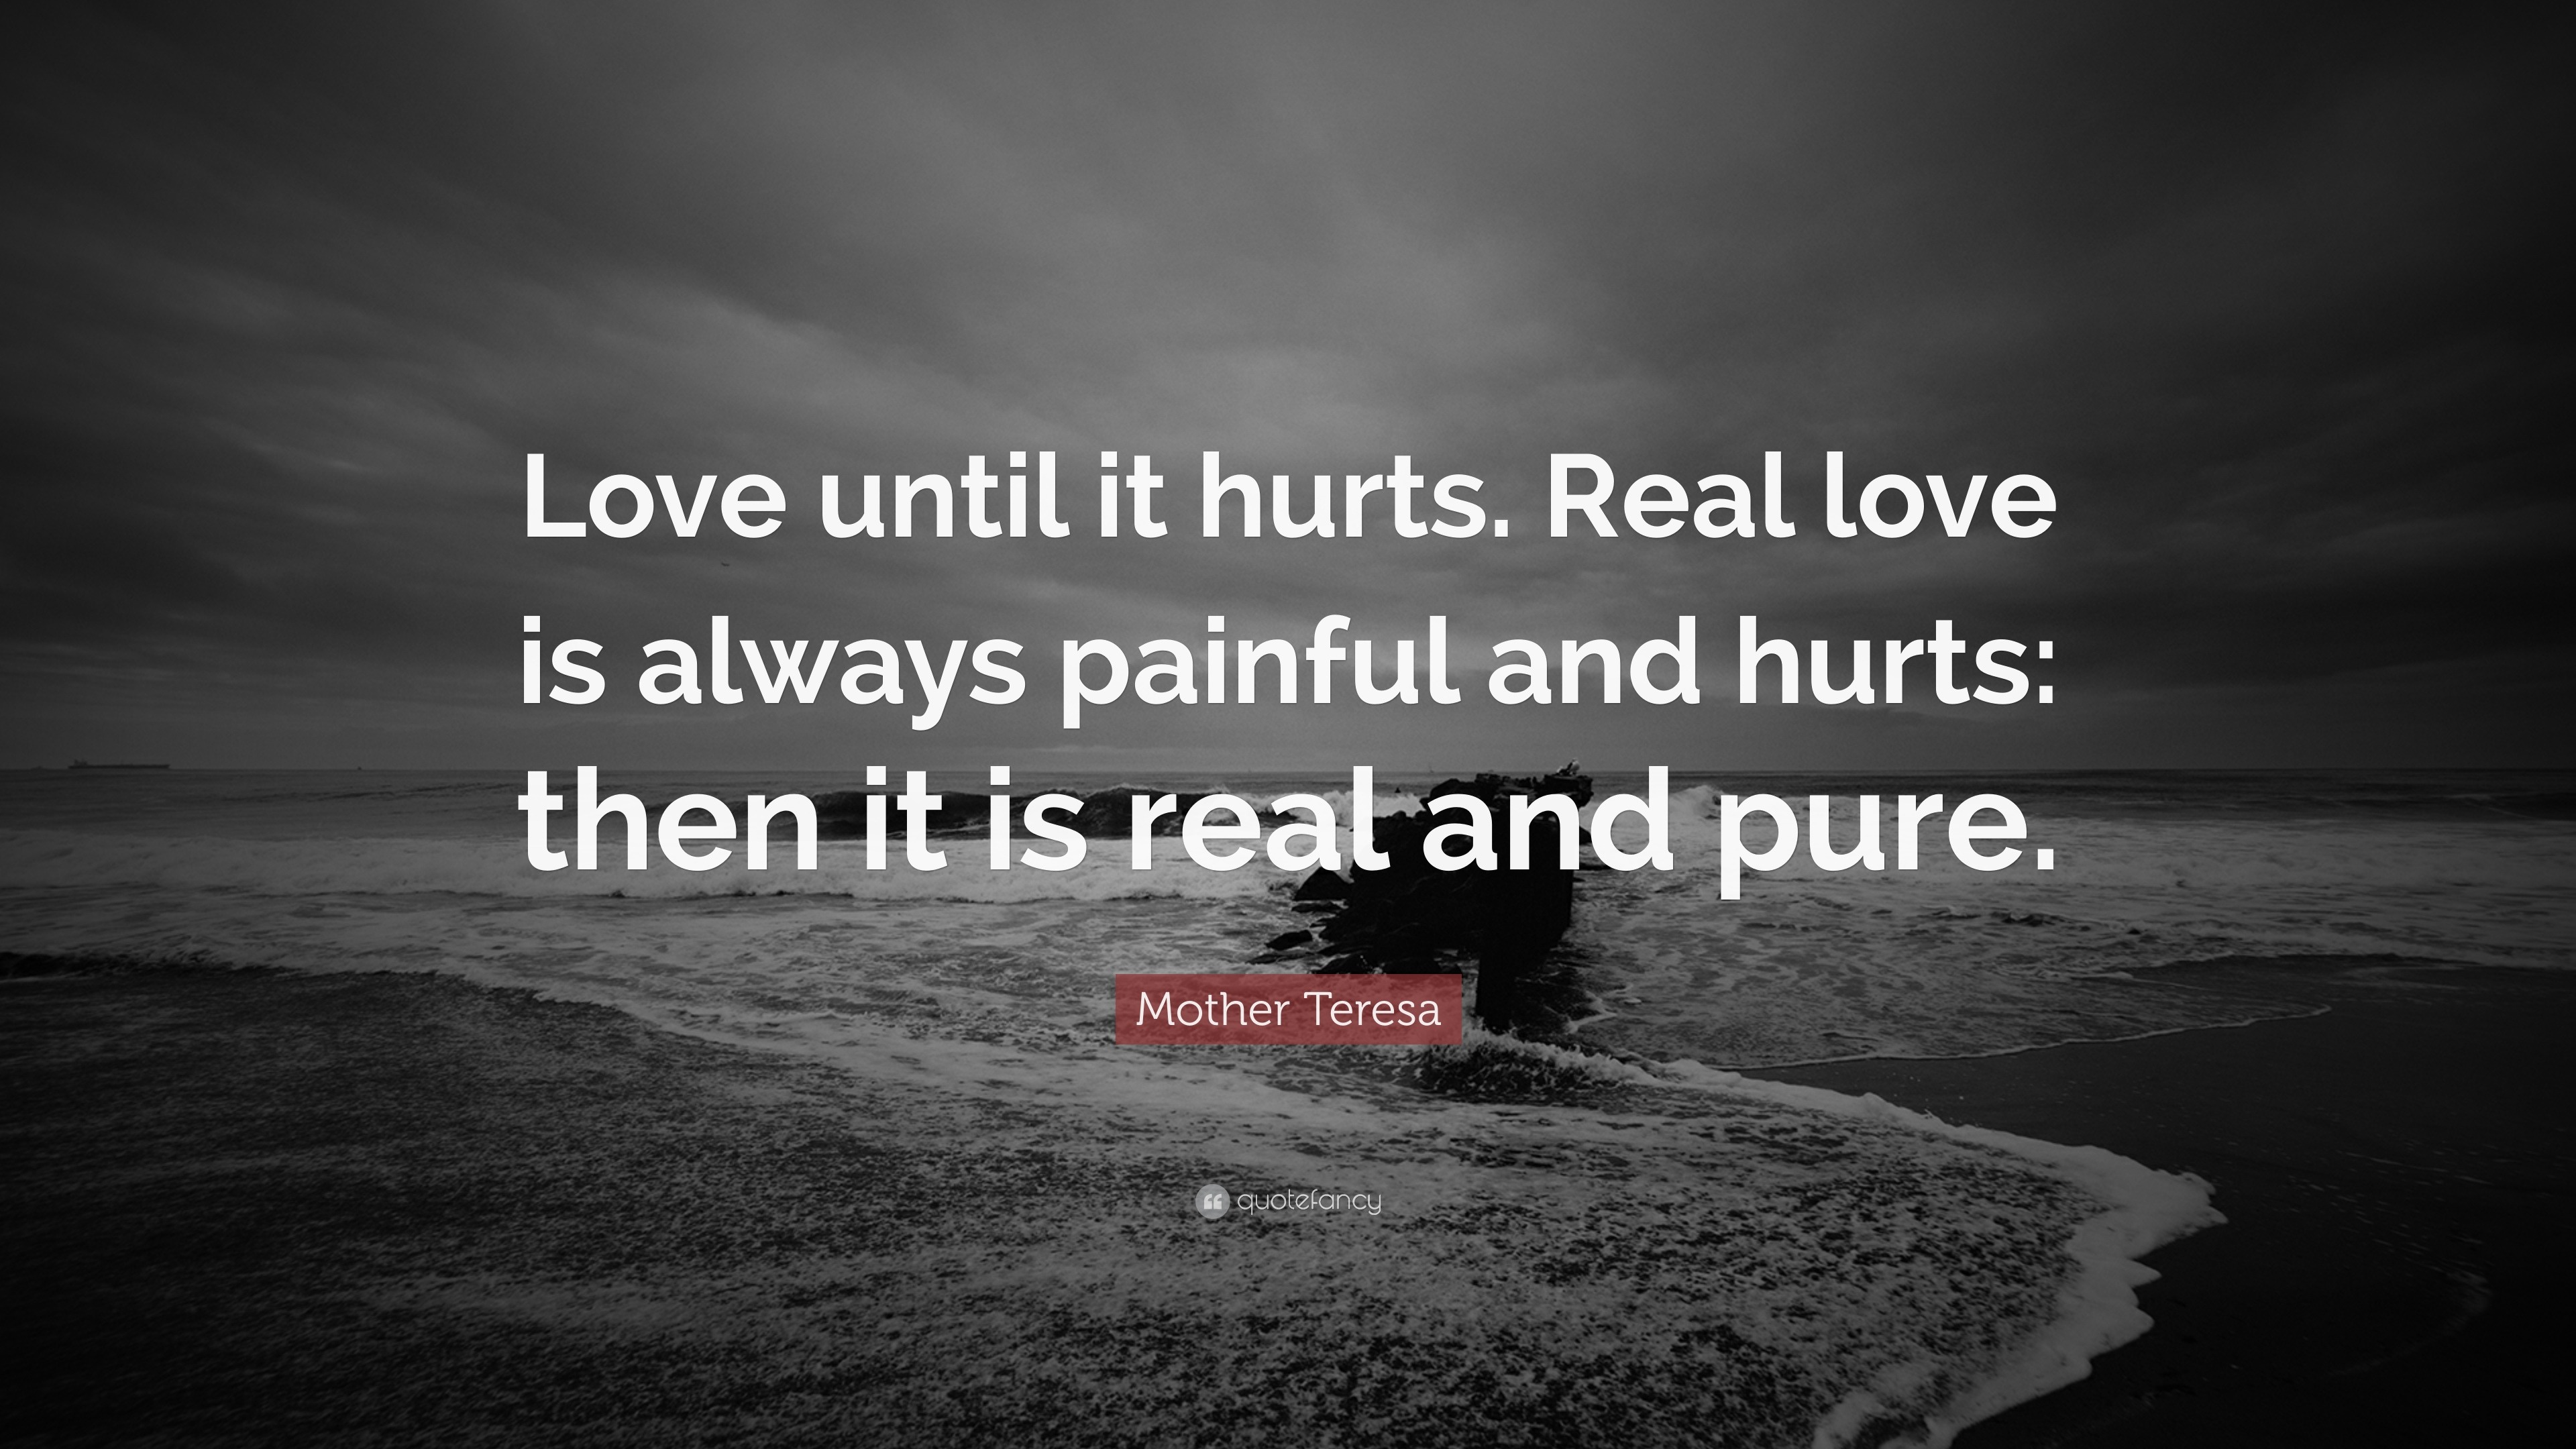 Mother Teresa Quote “Love until it hurts Real love is always painful and